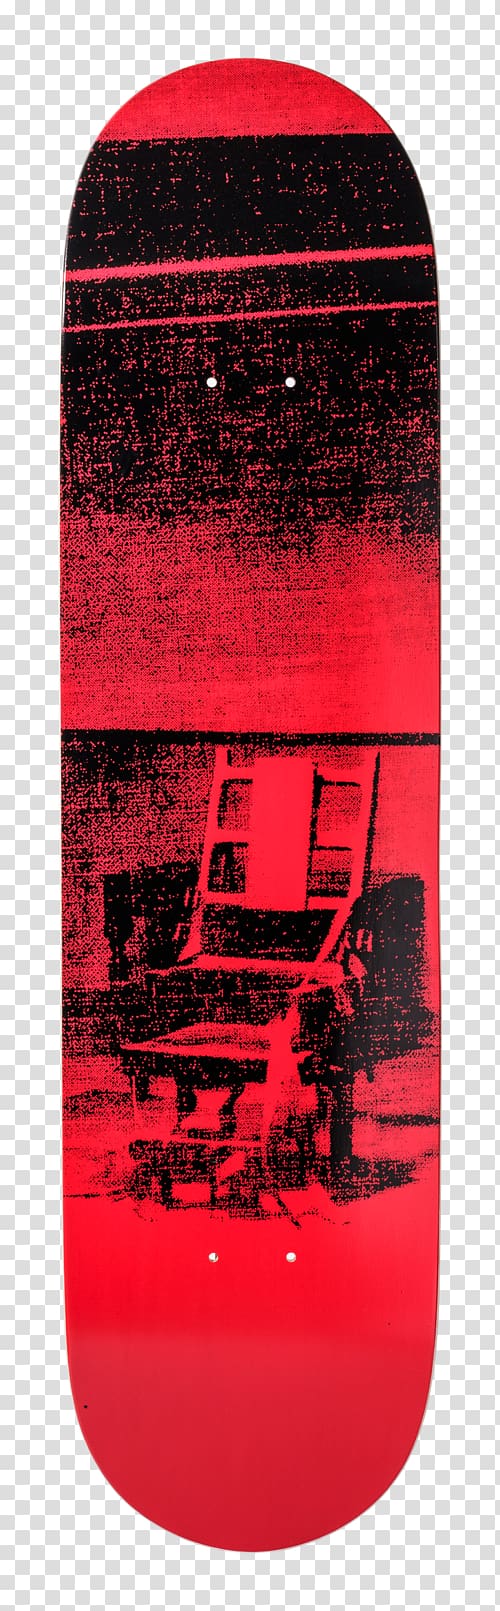 Artist Electric chair Automotive Tail & Brake Light Electricity, Andy Warhol transparent background PNG clipart